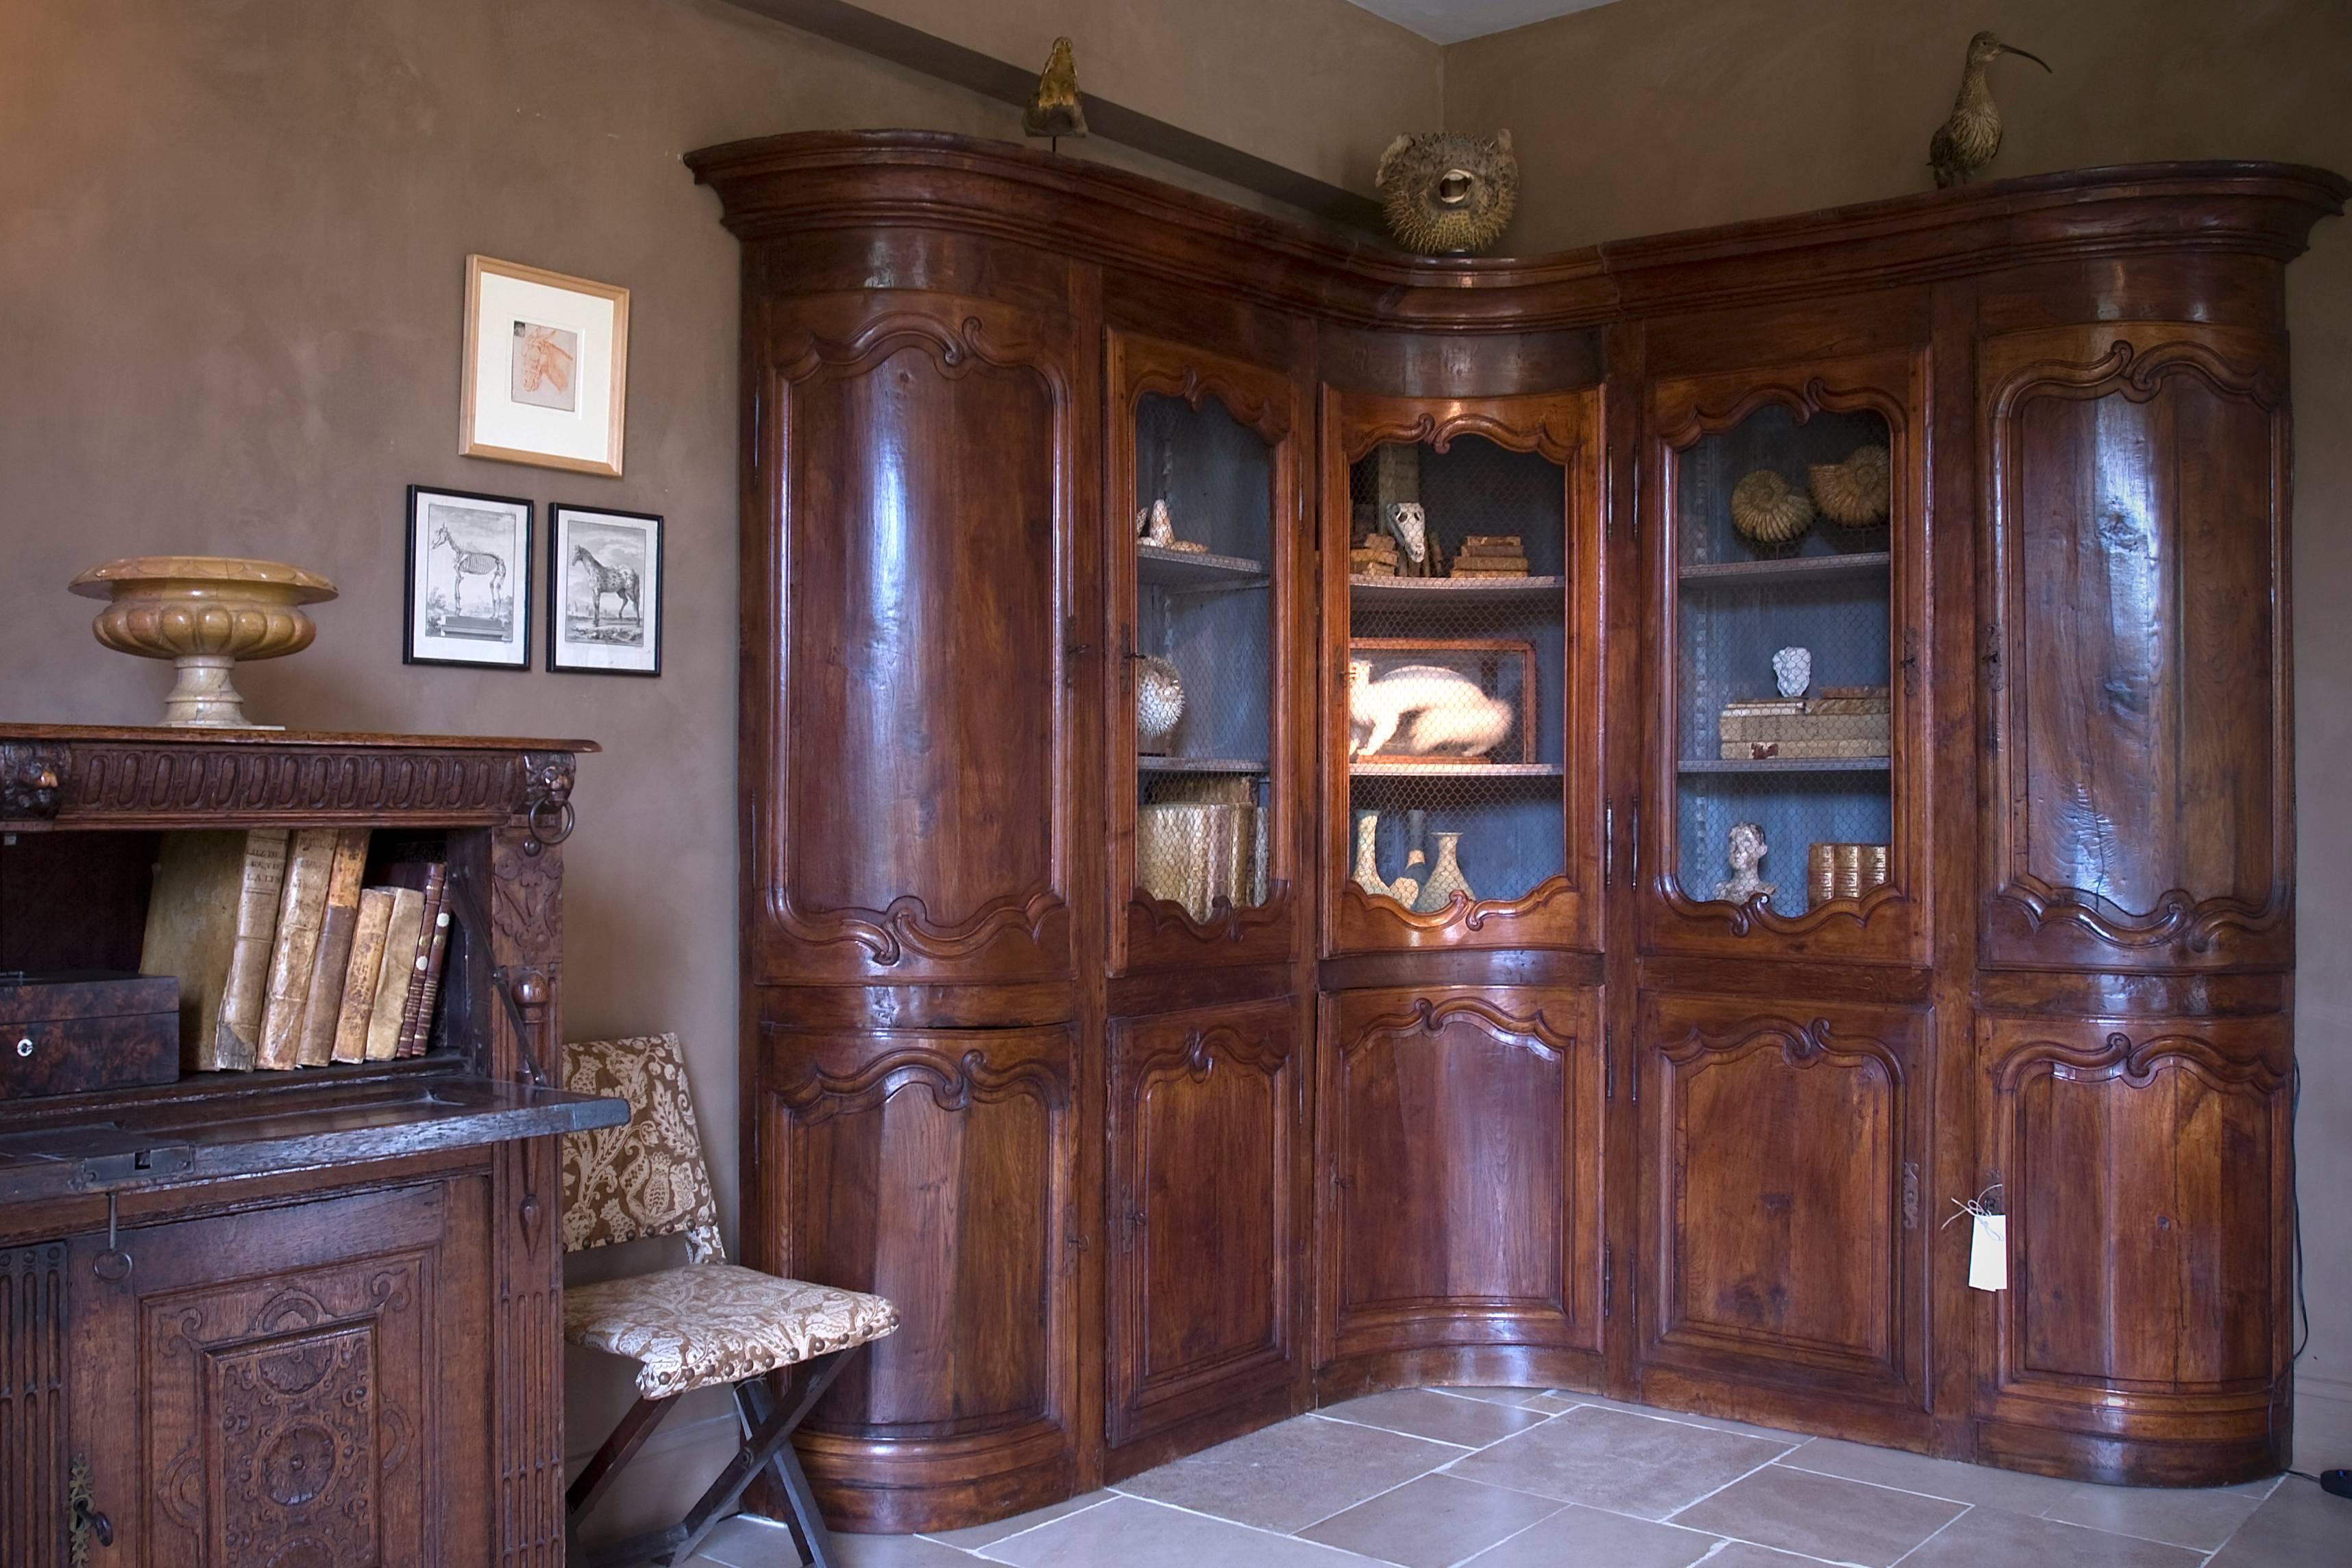 This mid-18th century oak corner cupboard originates from the Prebysterie (living quarters of a pastor) of the small Normandy village of Foie, now part of Normanville. It was reputed to be removed during the French revolution and ended up in a